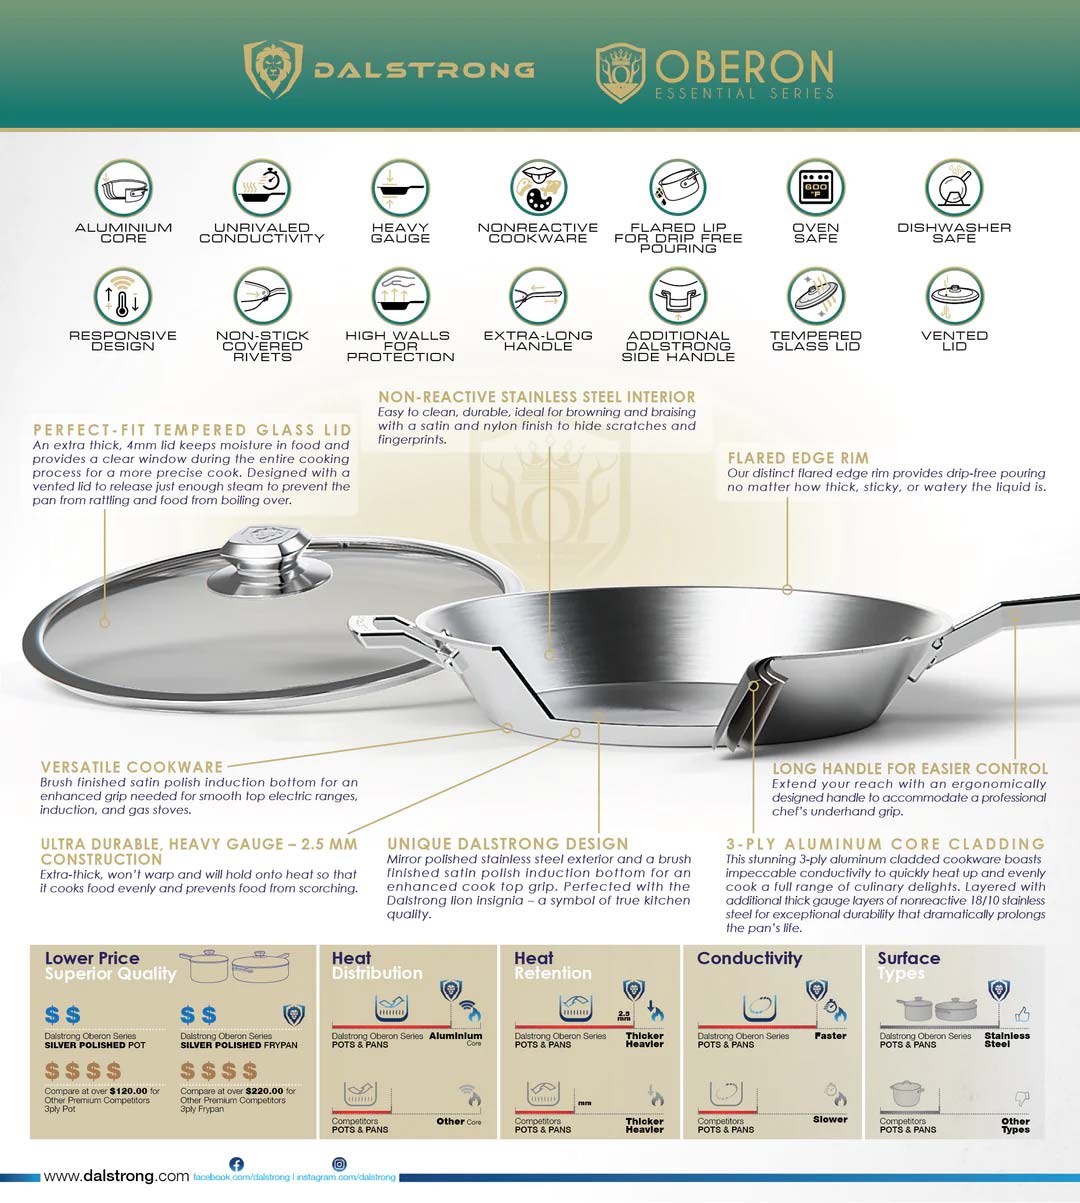 Dalstrong oberon series 12 inch silver saute frying pan specification.